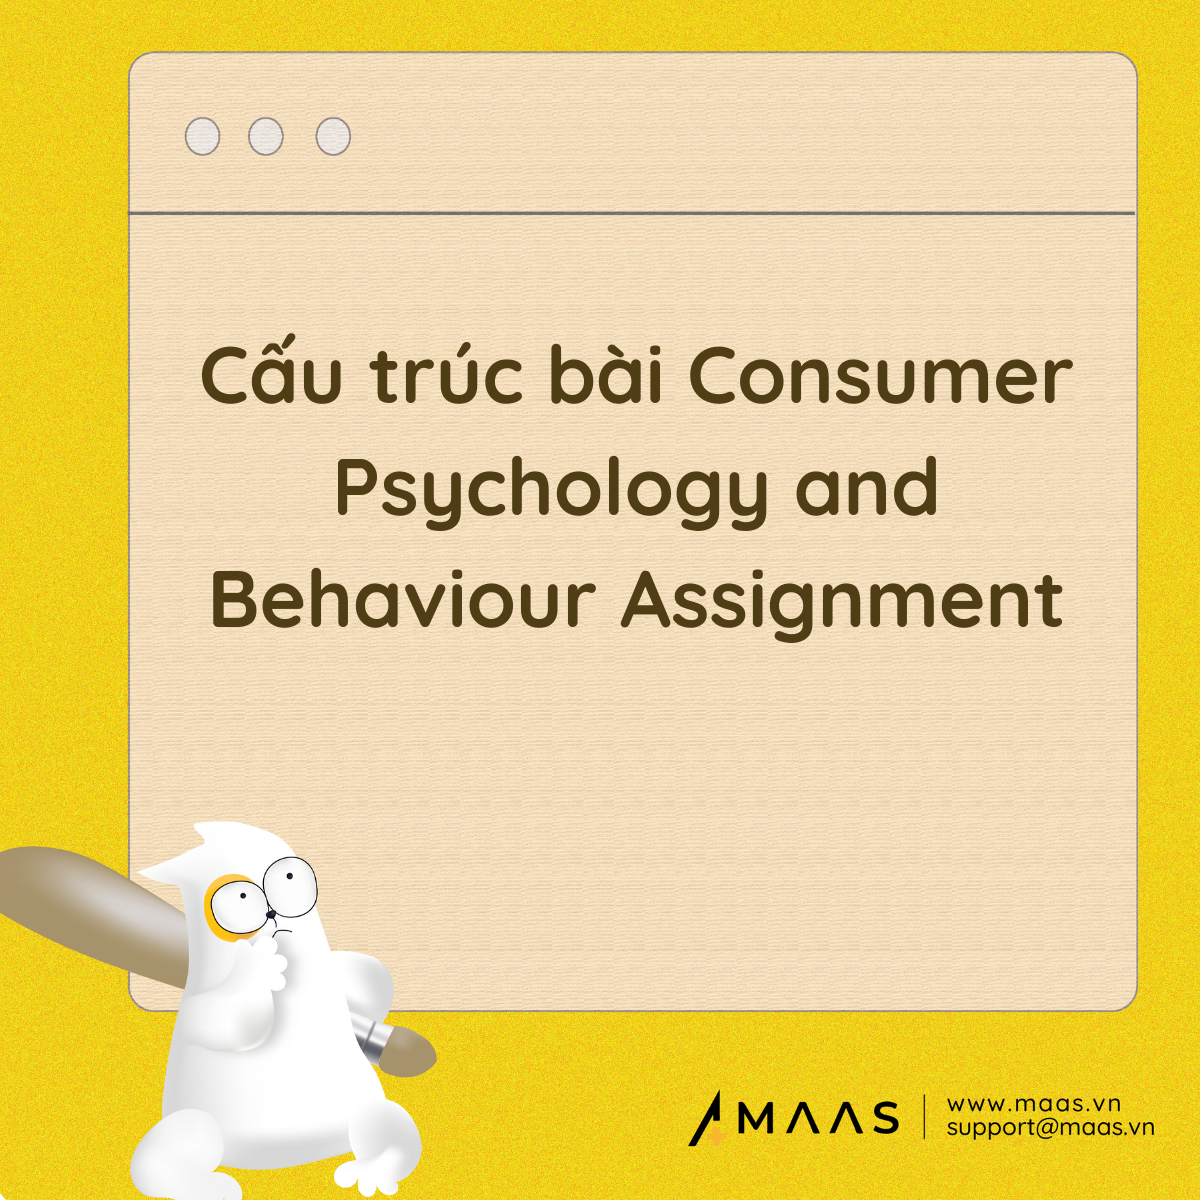 Consumer Psychology and Behaviour Assignment